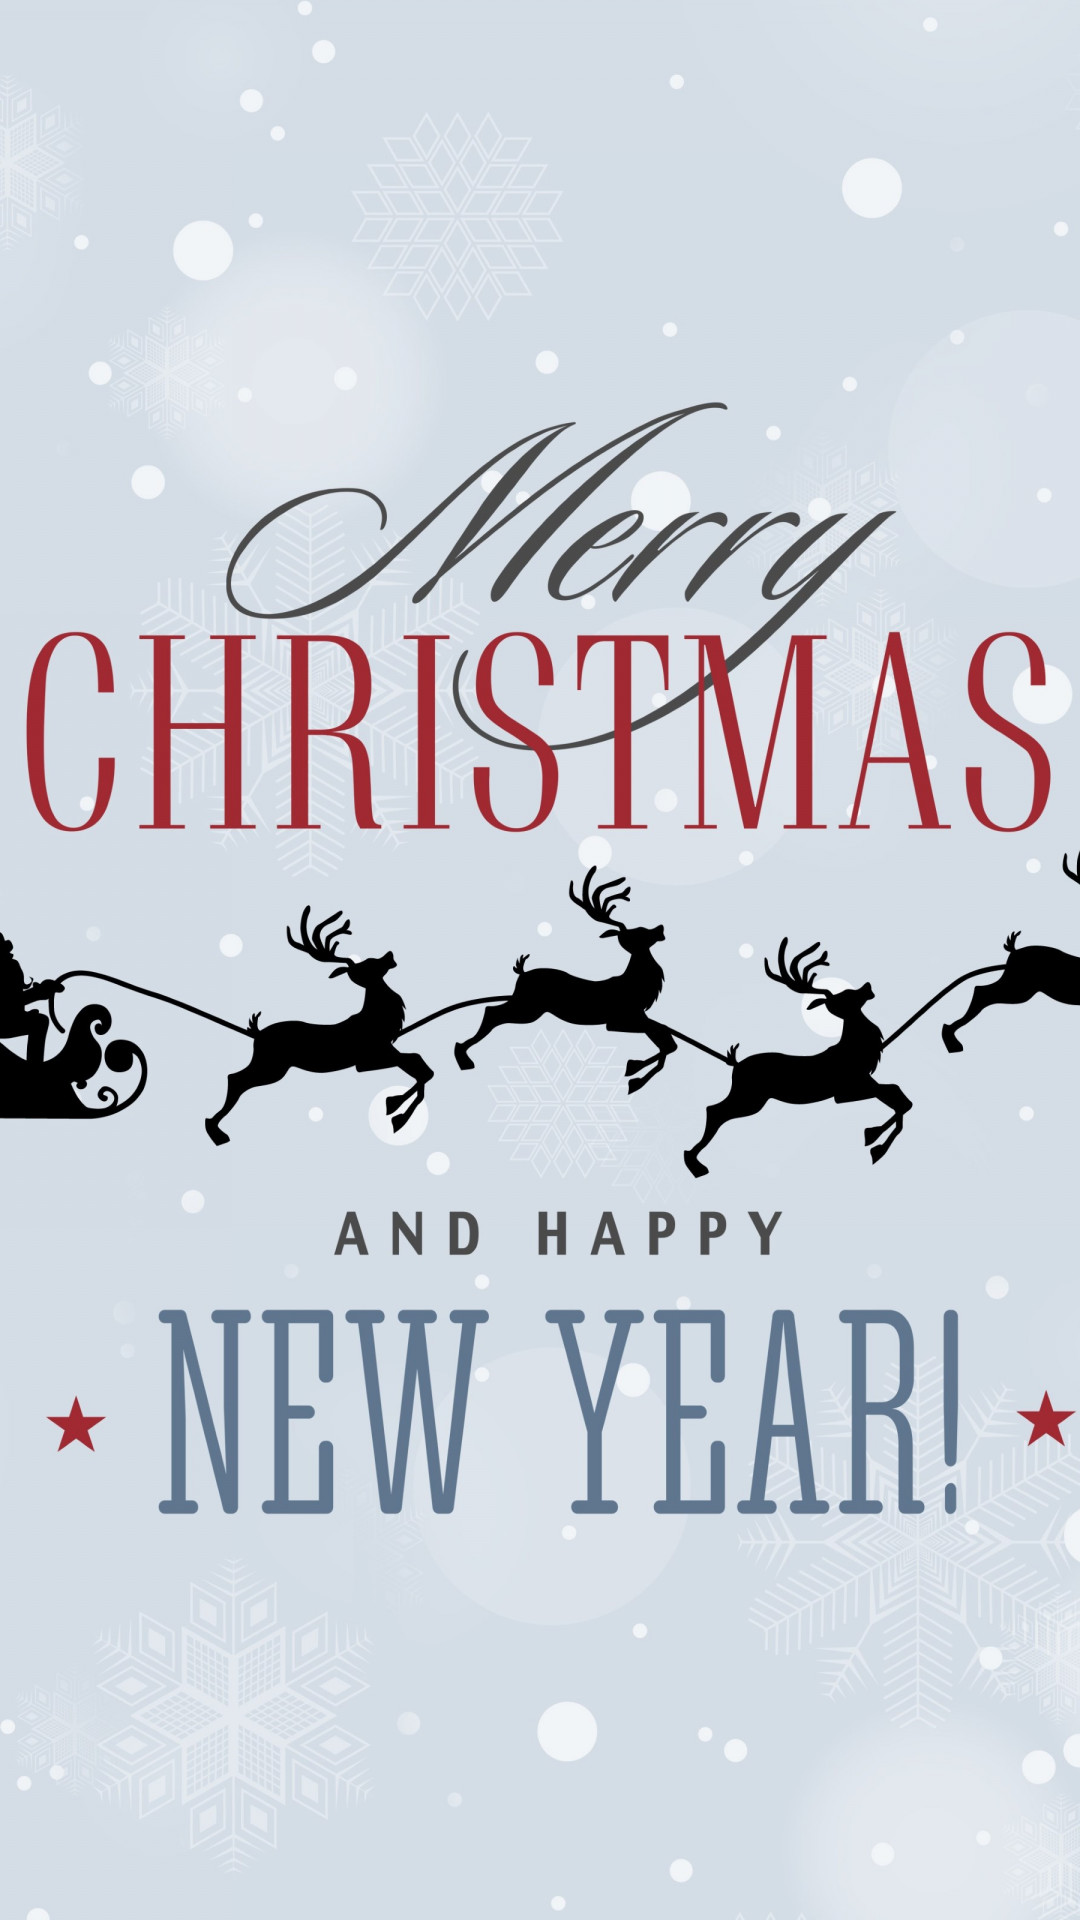 Merry Christmas and a Happy New Year wallpaper 1080x1920